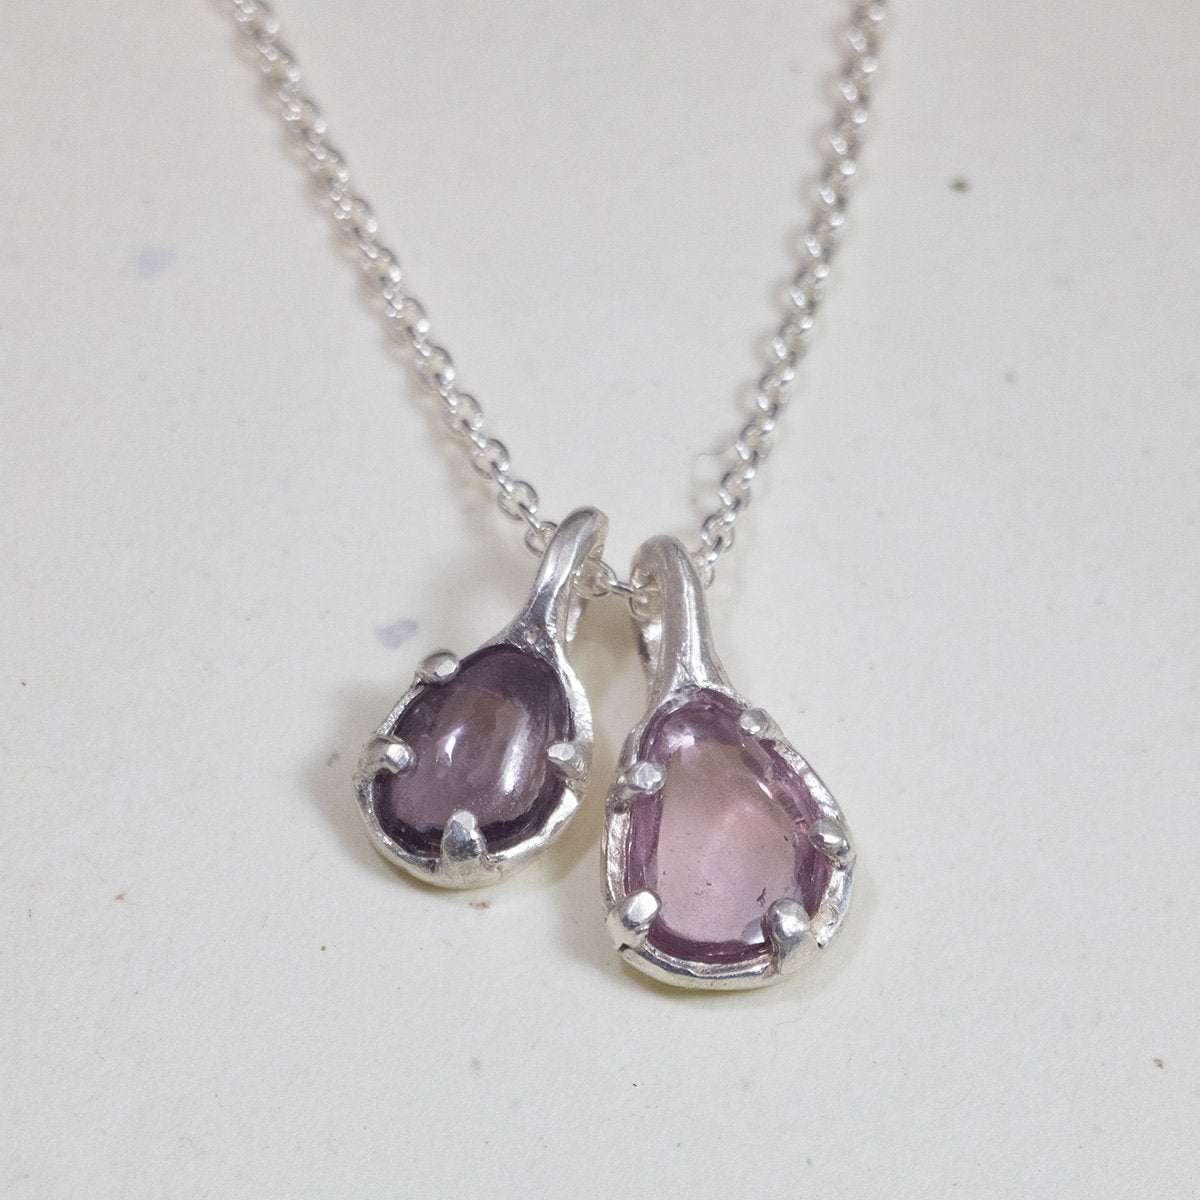 2 Shades of Sapphire Silver Necklace